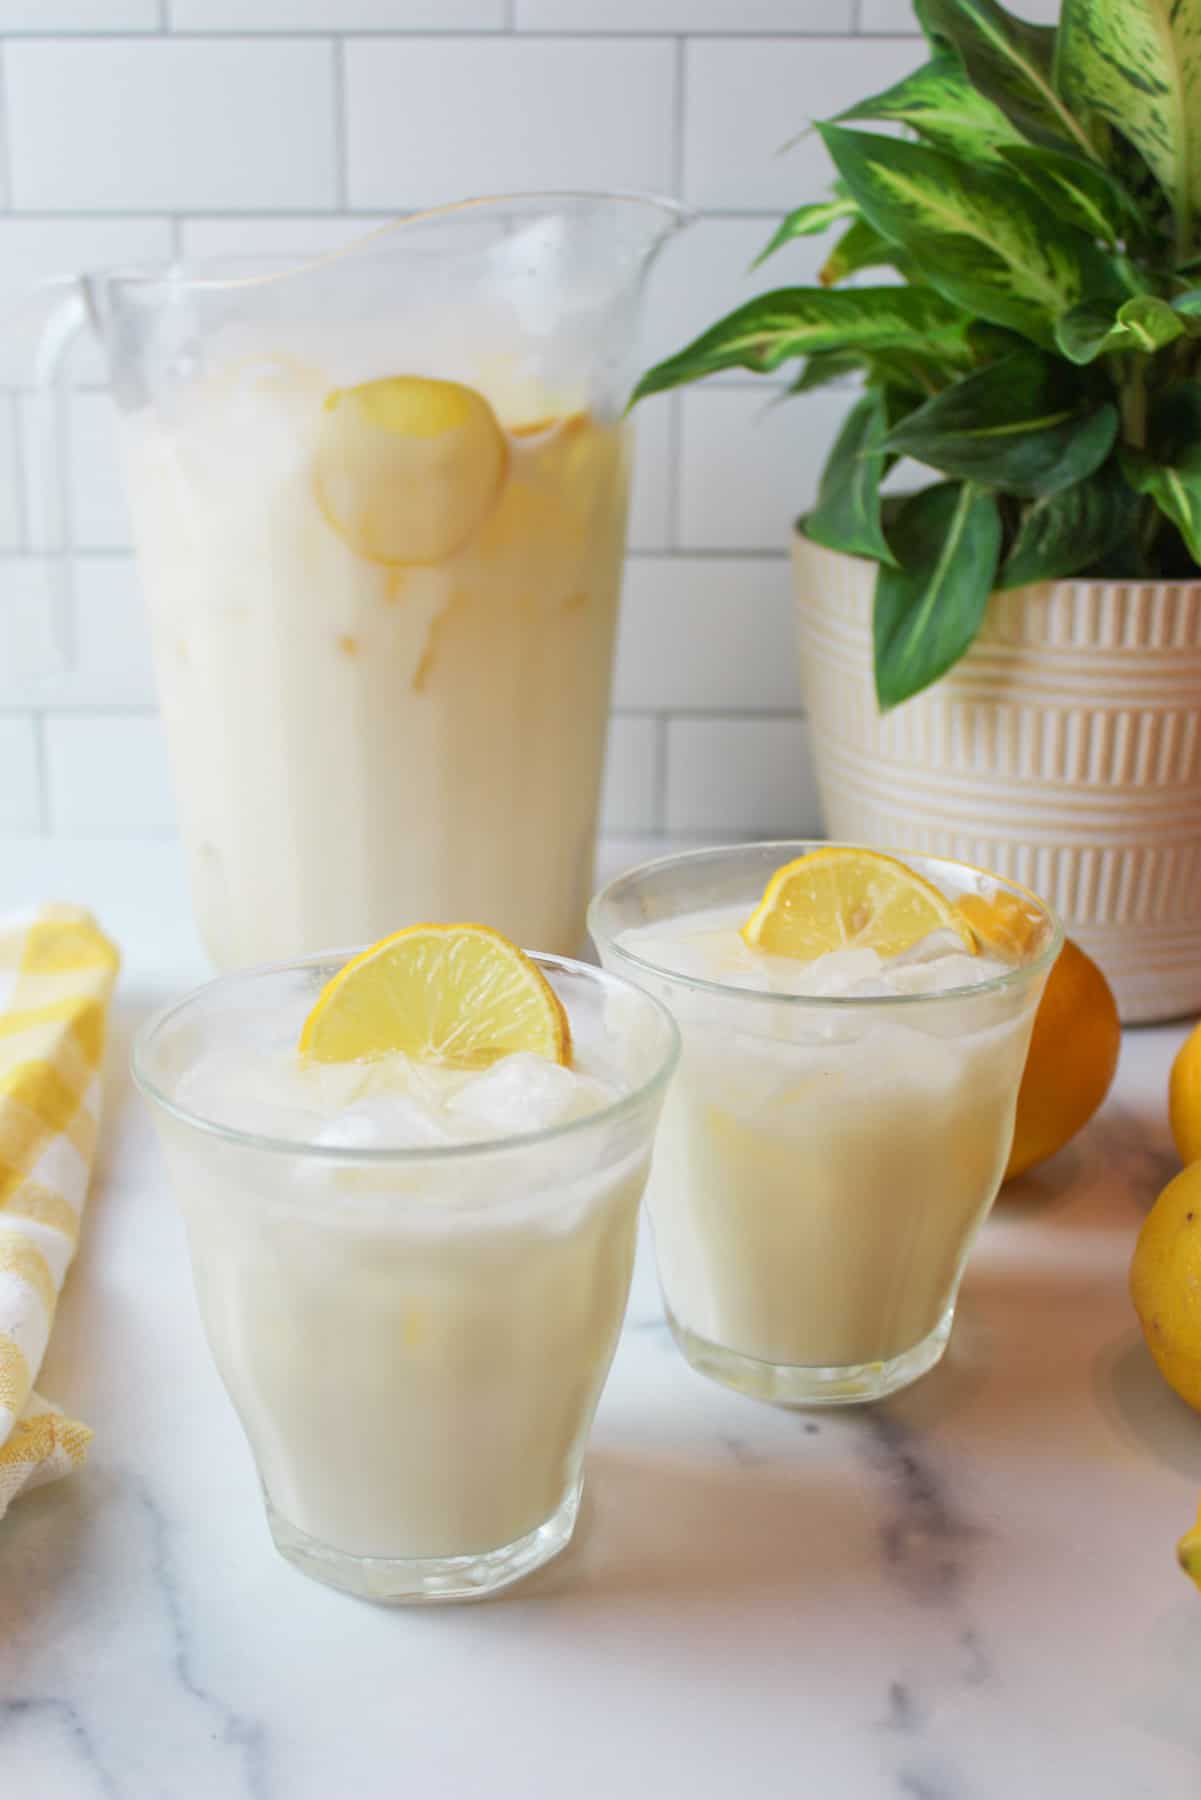 two glasses of creamy lemonade garnished with a slice of lemon and a pitcher of lemonade in the background